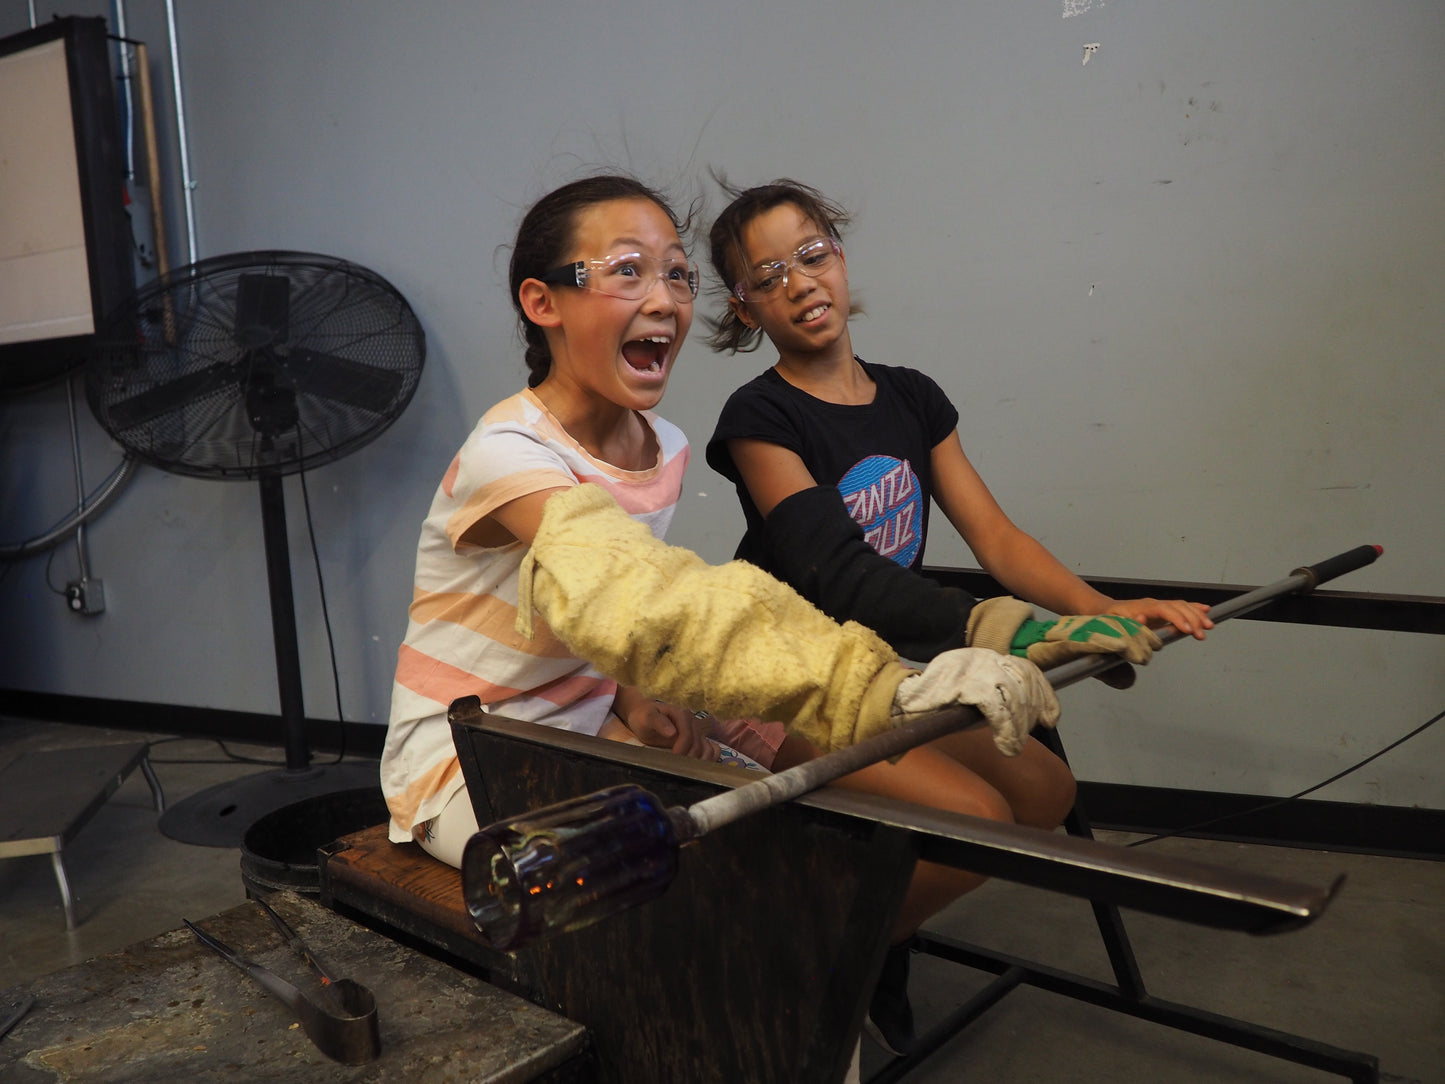 Glassblowing Camp (ages 12–16)